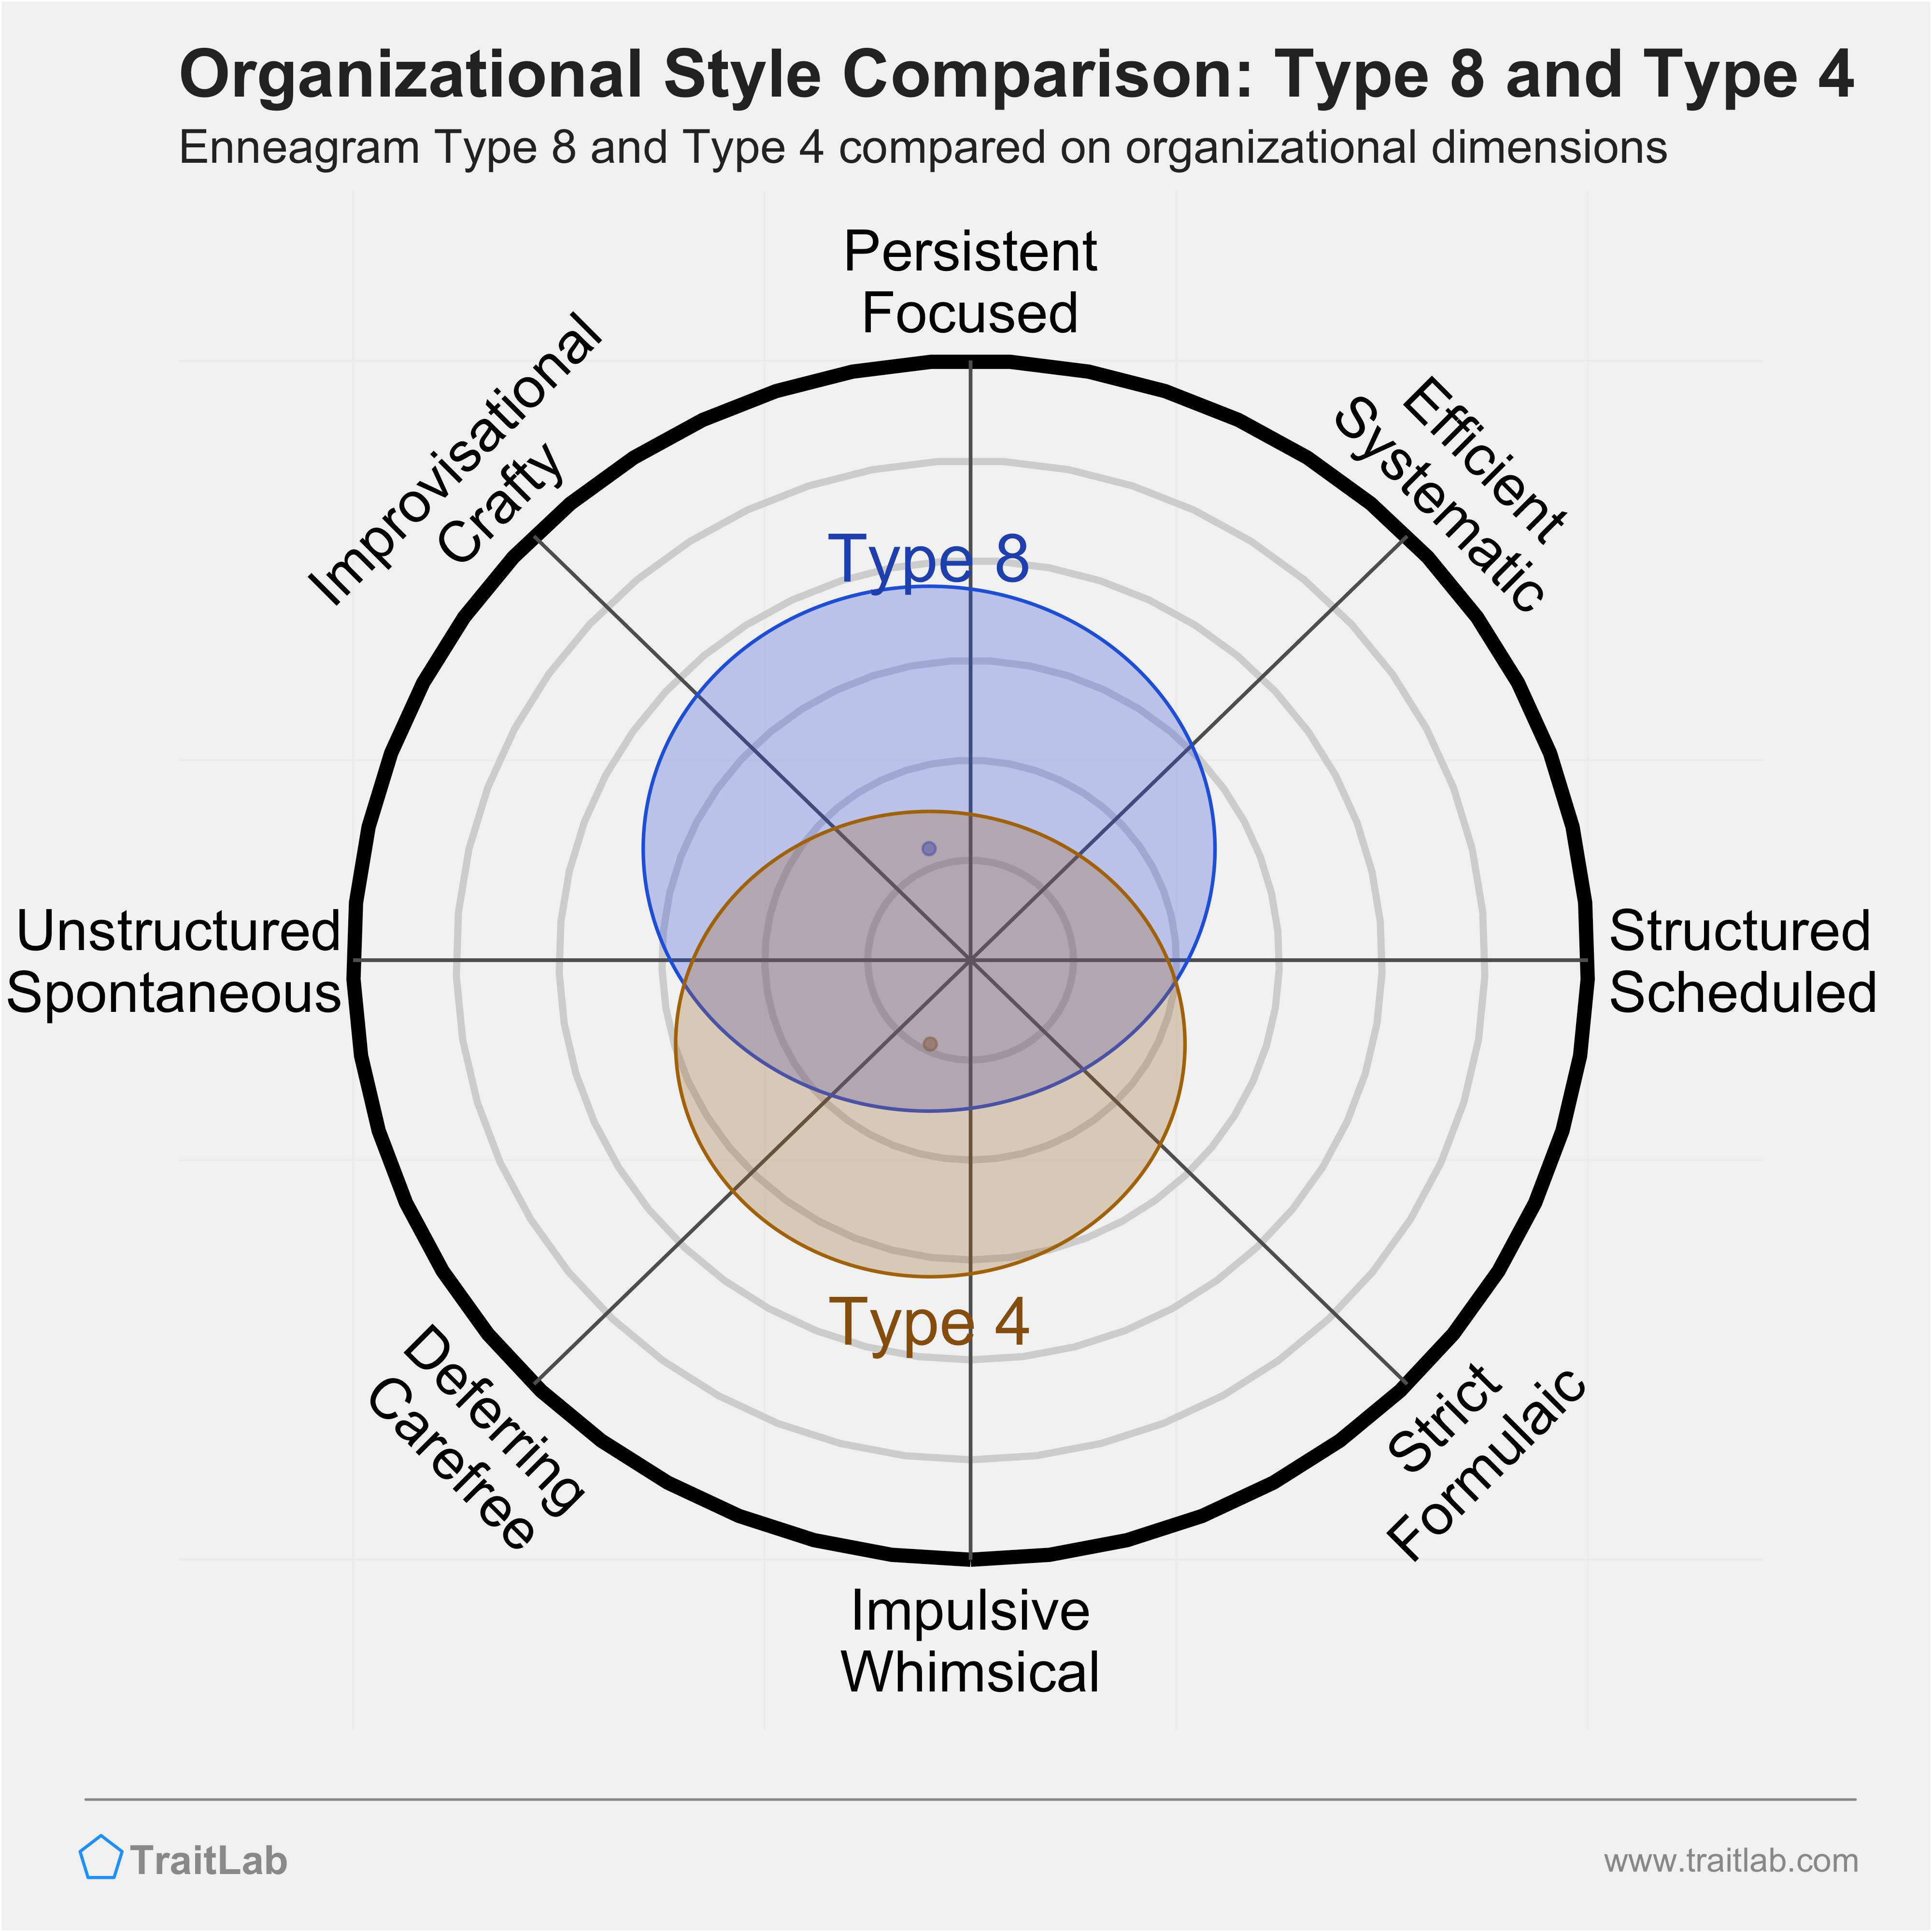 Type 8 and Type 4 comparison across organizational dimensions